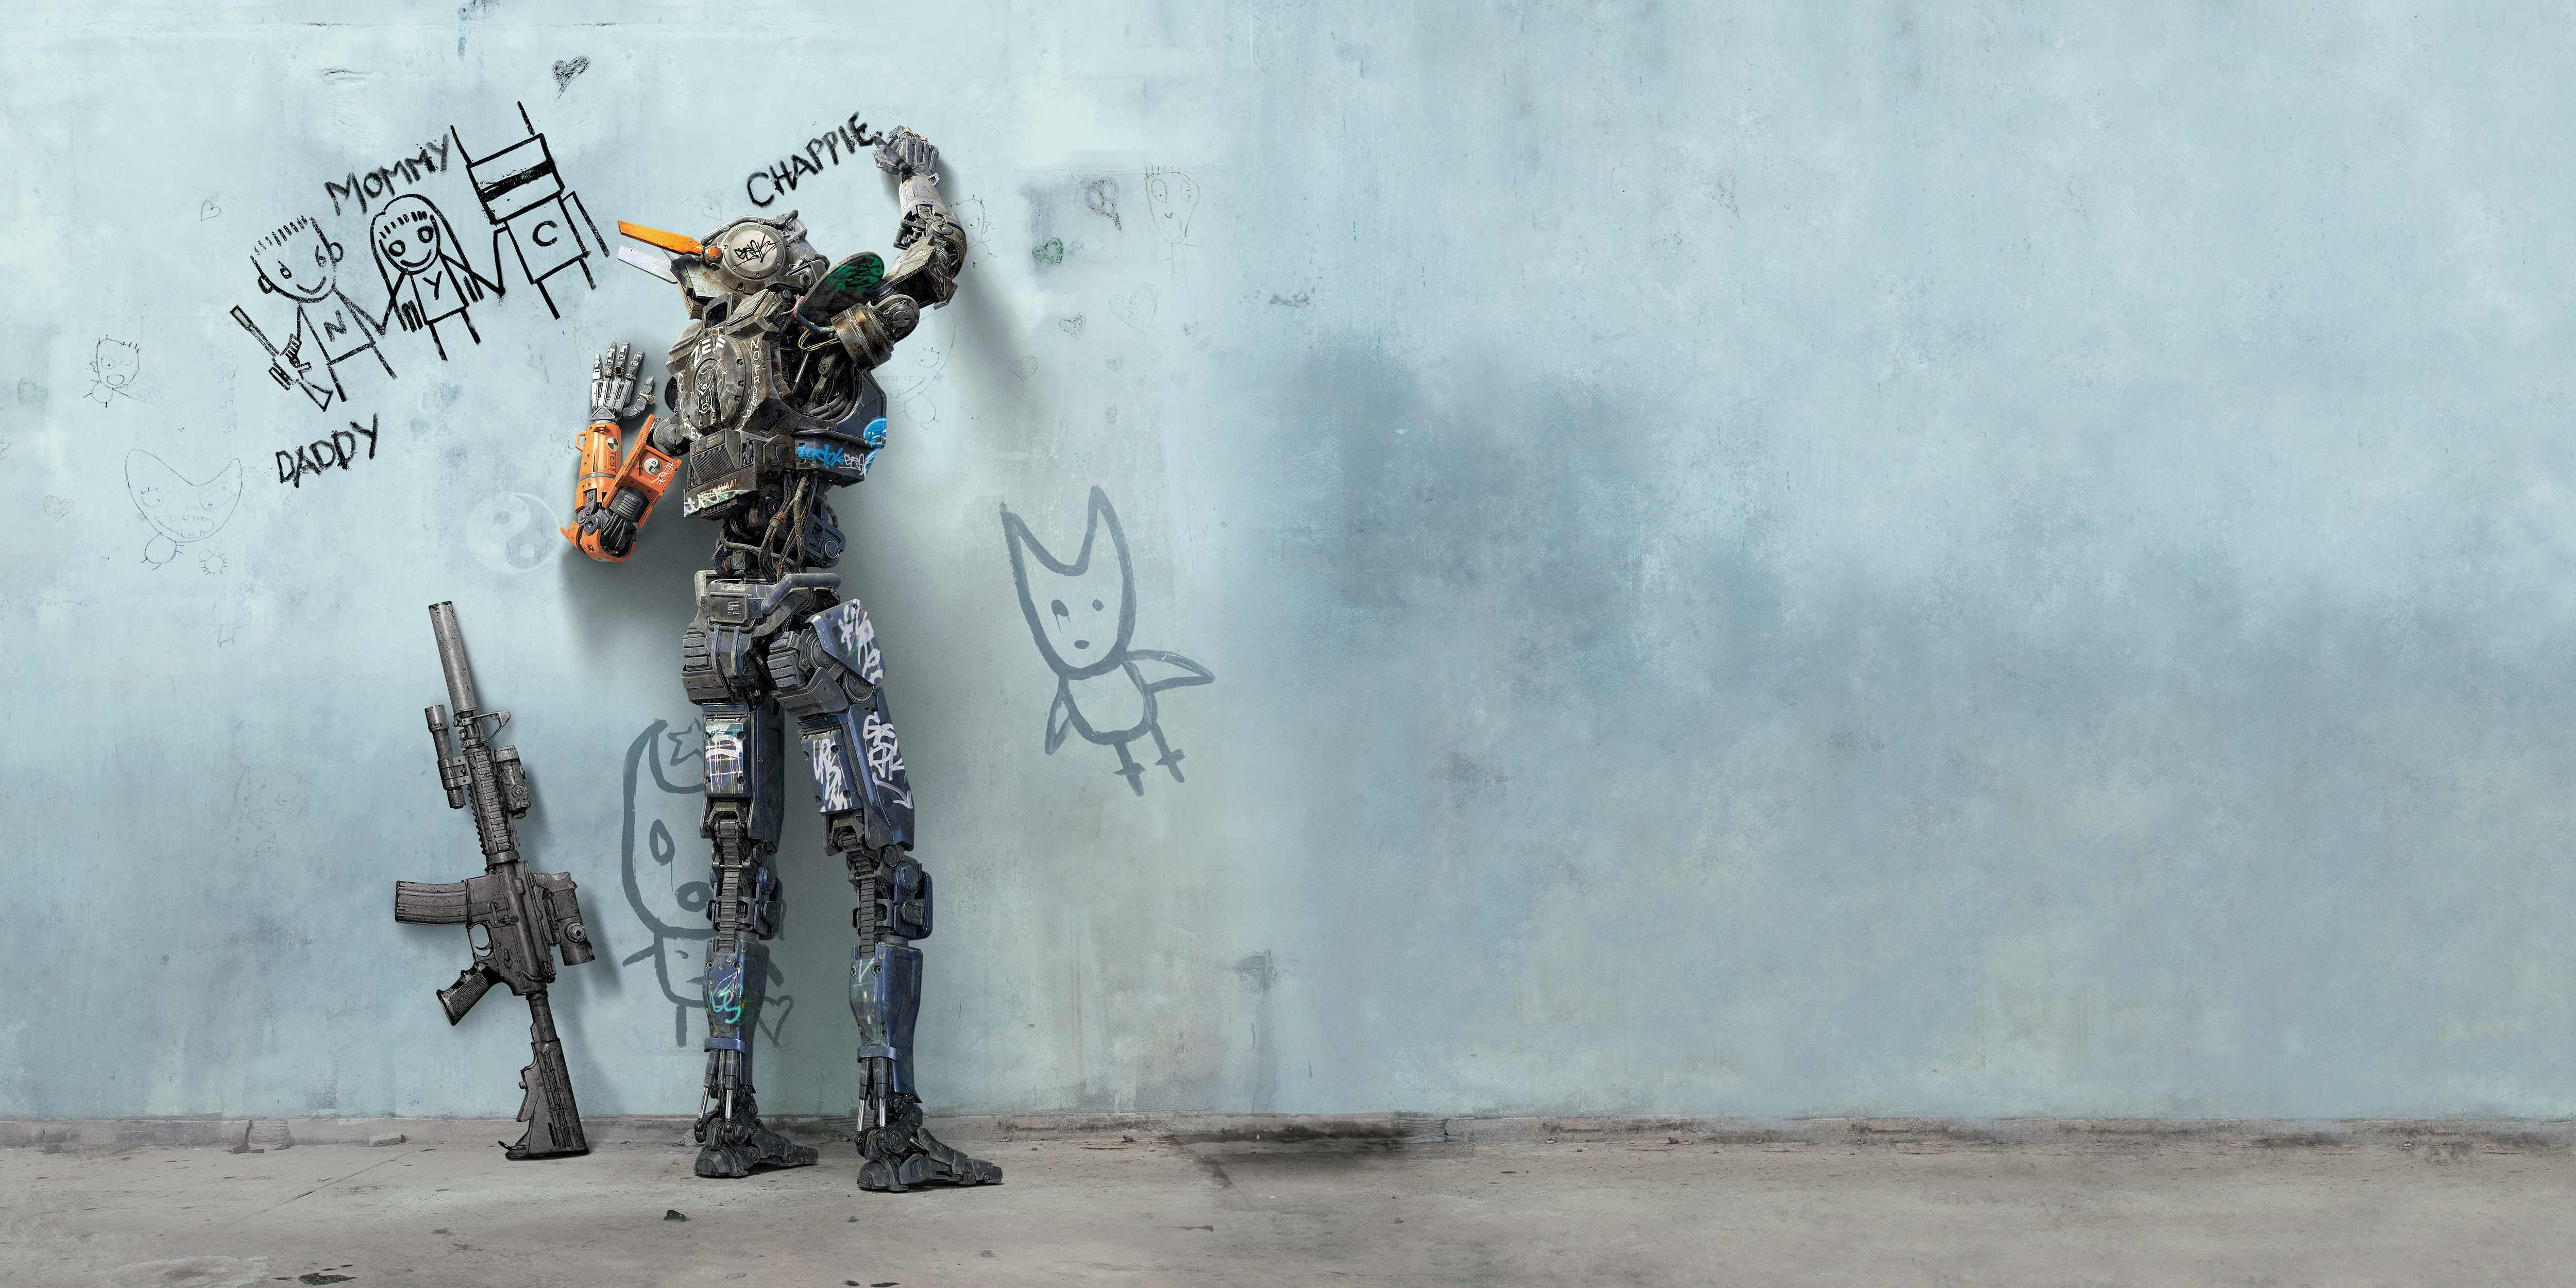 Wallpapers A robot named Chappie 2015 fantasy action on the desktop